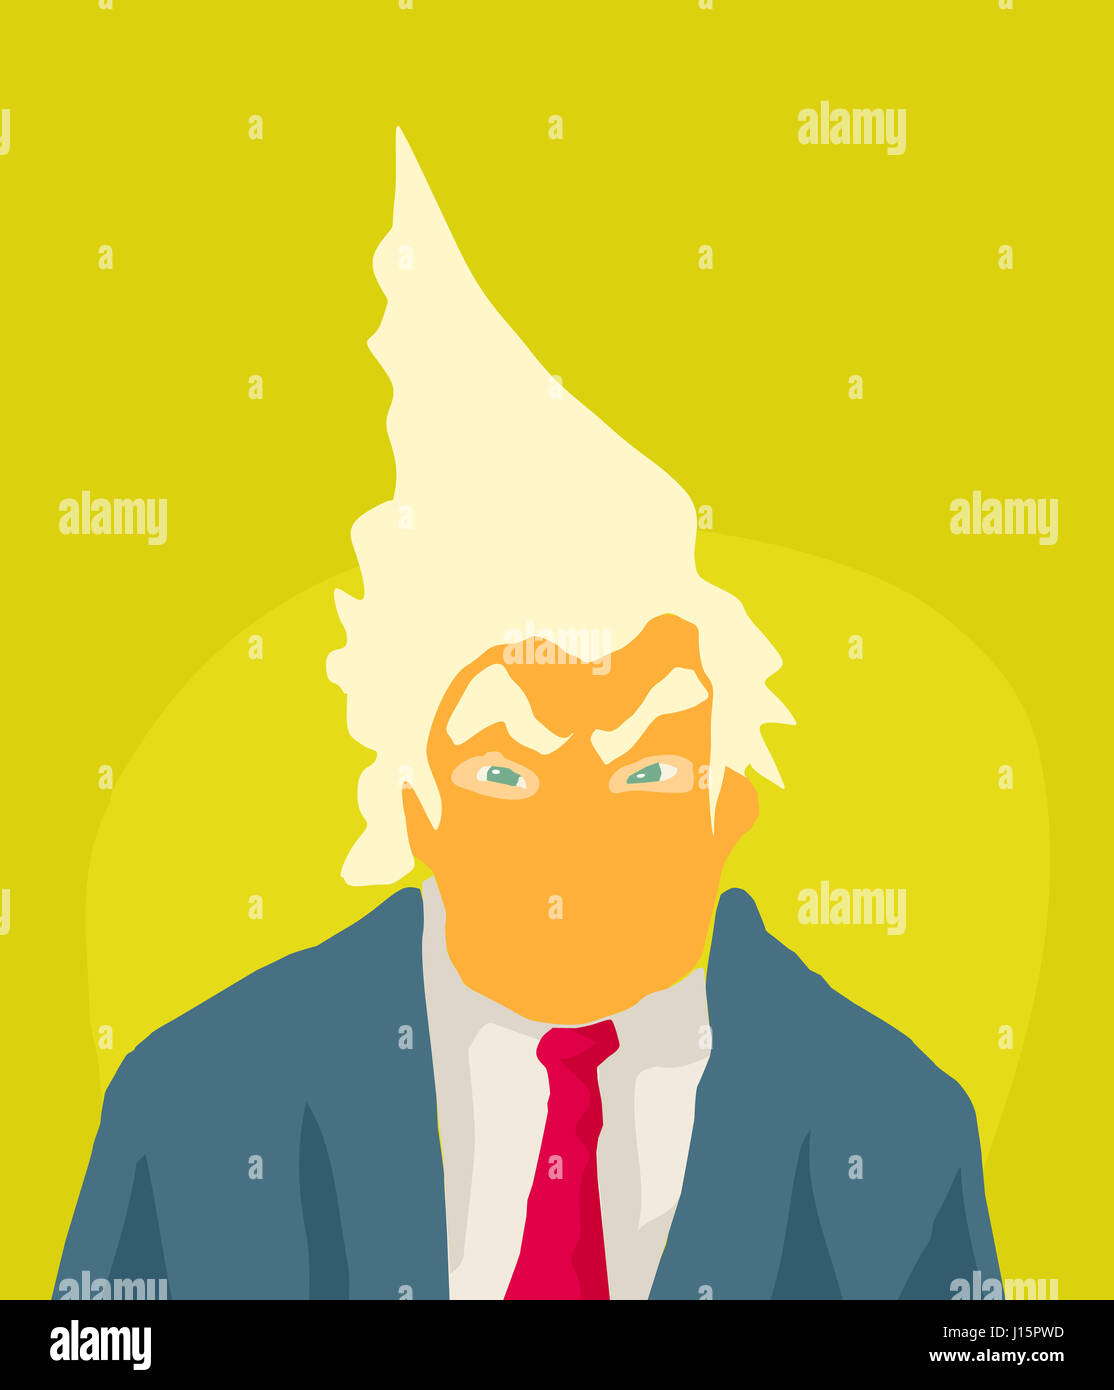 April 18, 2017. Abstract orange Trump caricature with big eyebrows and spiked hair Stock Photo